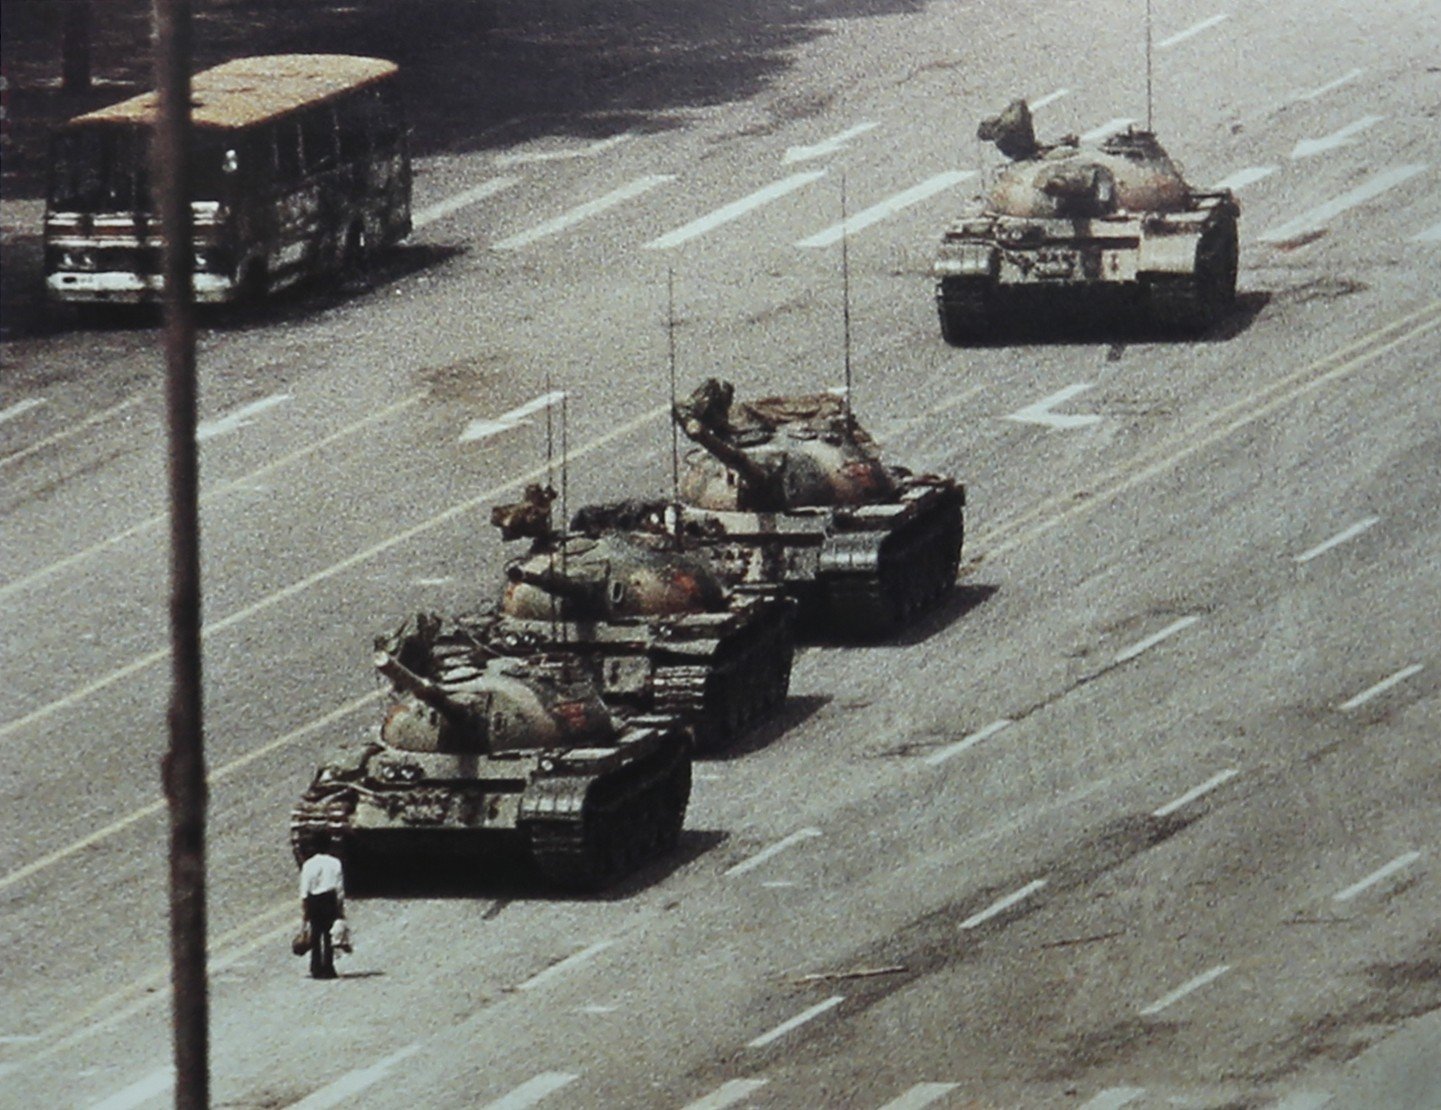 Tank Man in Tiananmen Square, Beijing on June 5, 1989, a day after soldiers cleared student protesters from the square. Photo: Reuters